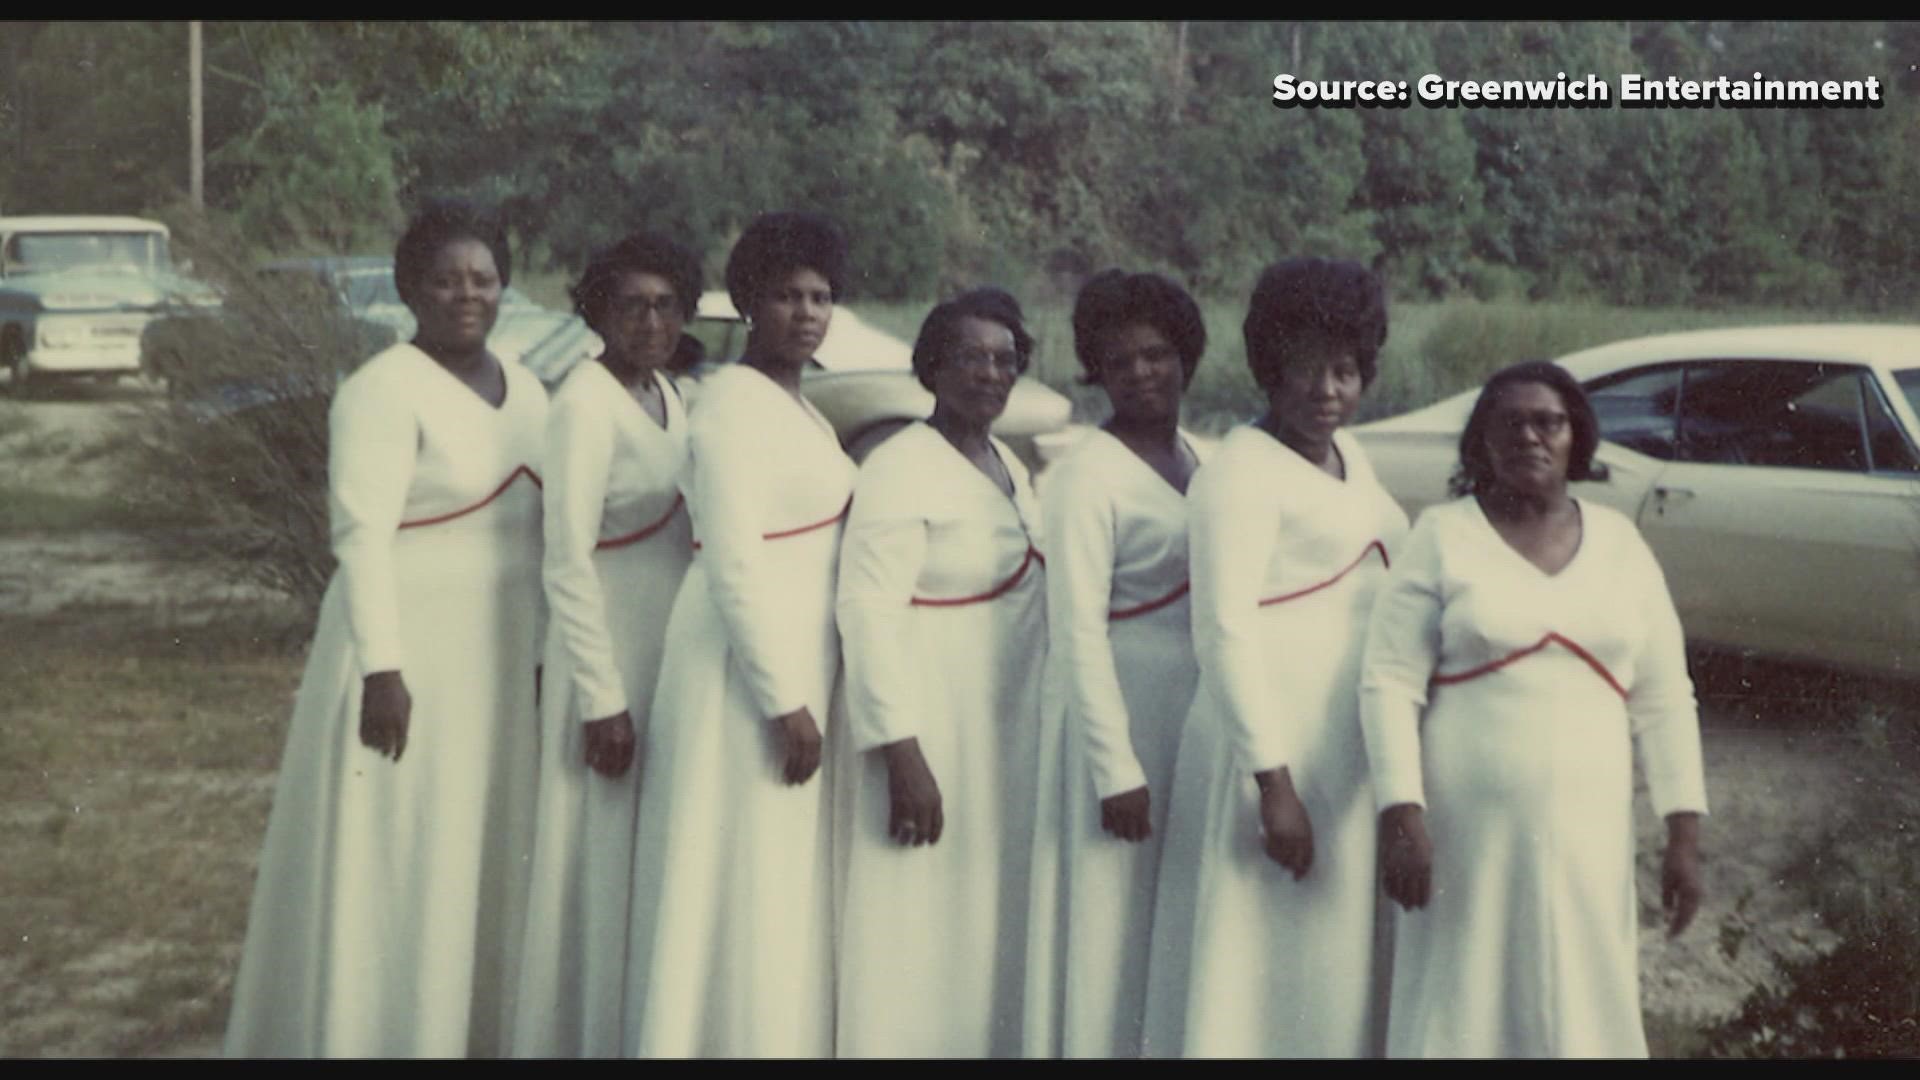 Check out this film focused on the musical journey of Lena "Mae" Perry and the 'Branchettes' of Newton Grove, North Carolina.